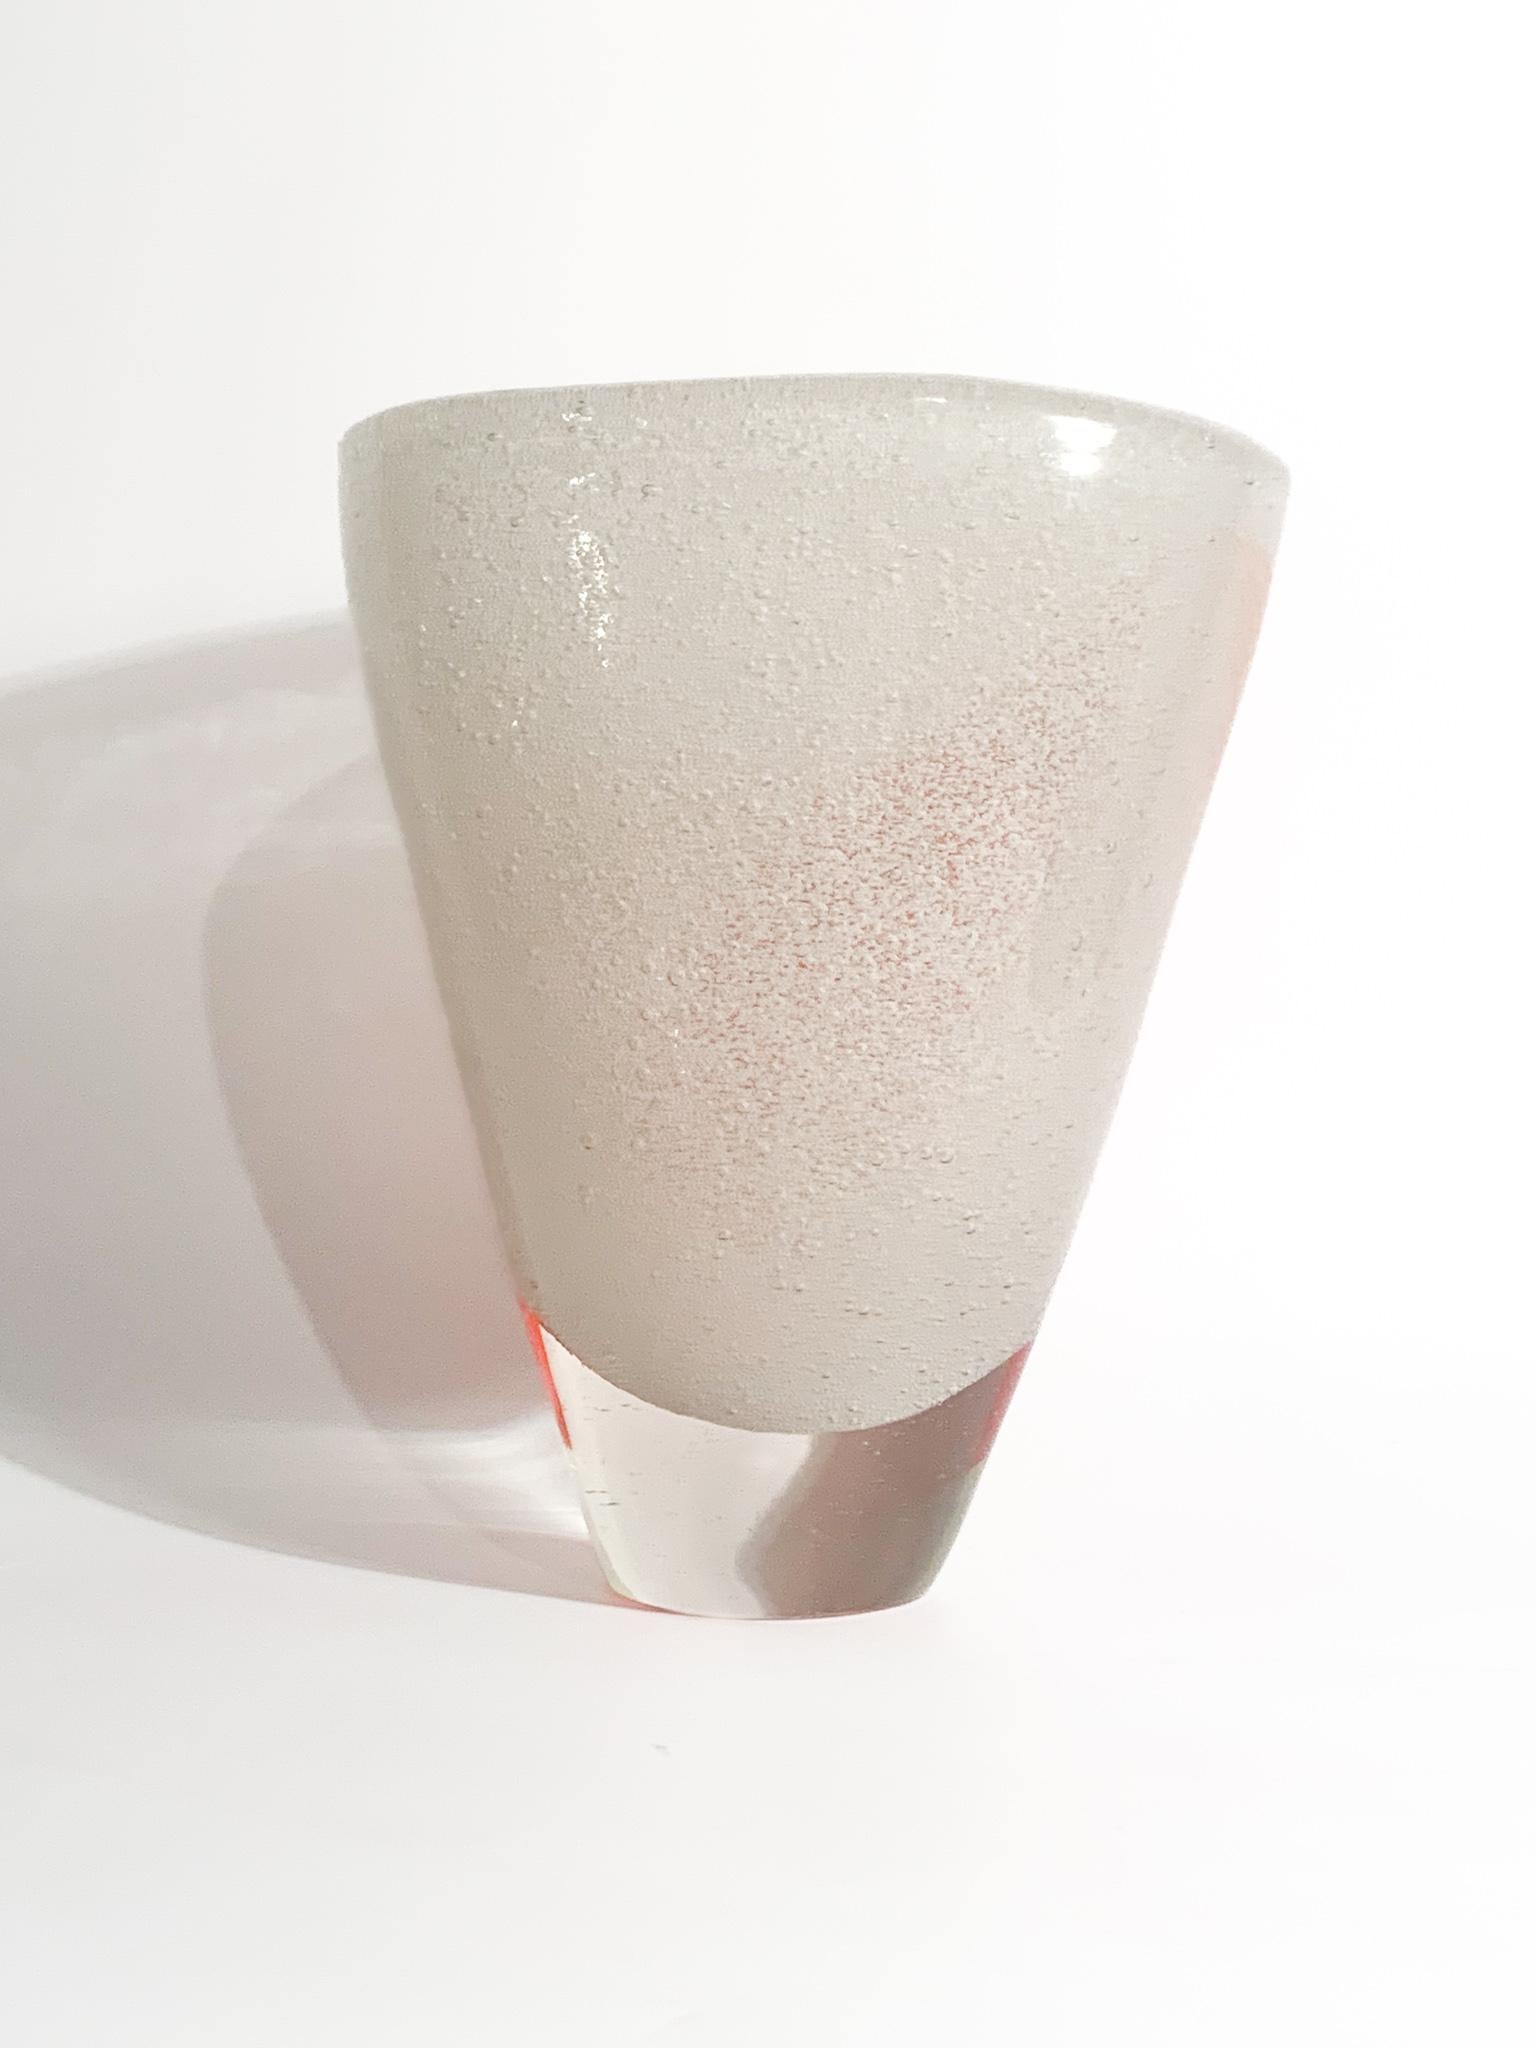 Italian Sommerso White and Orange Murano Glass Vase from the 1980s For Sale 4